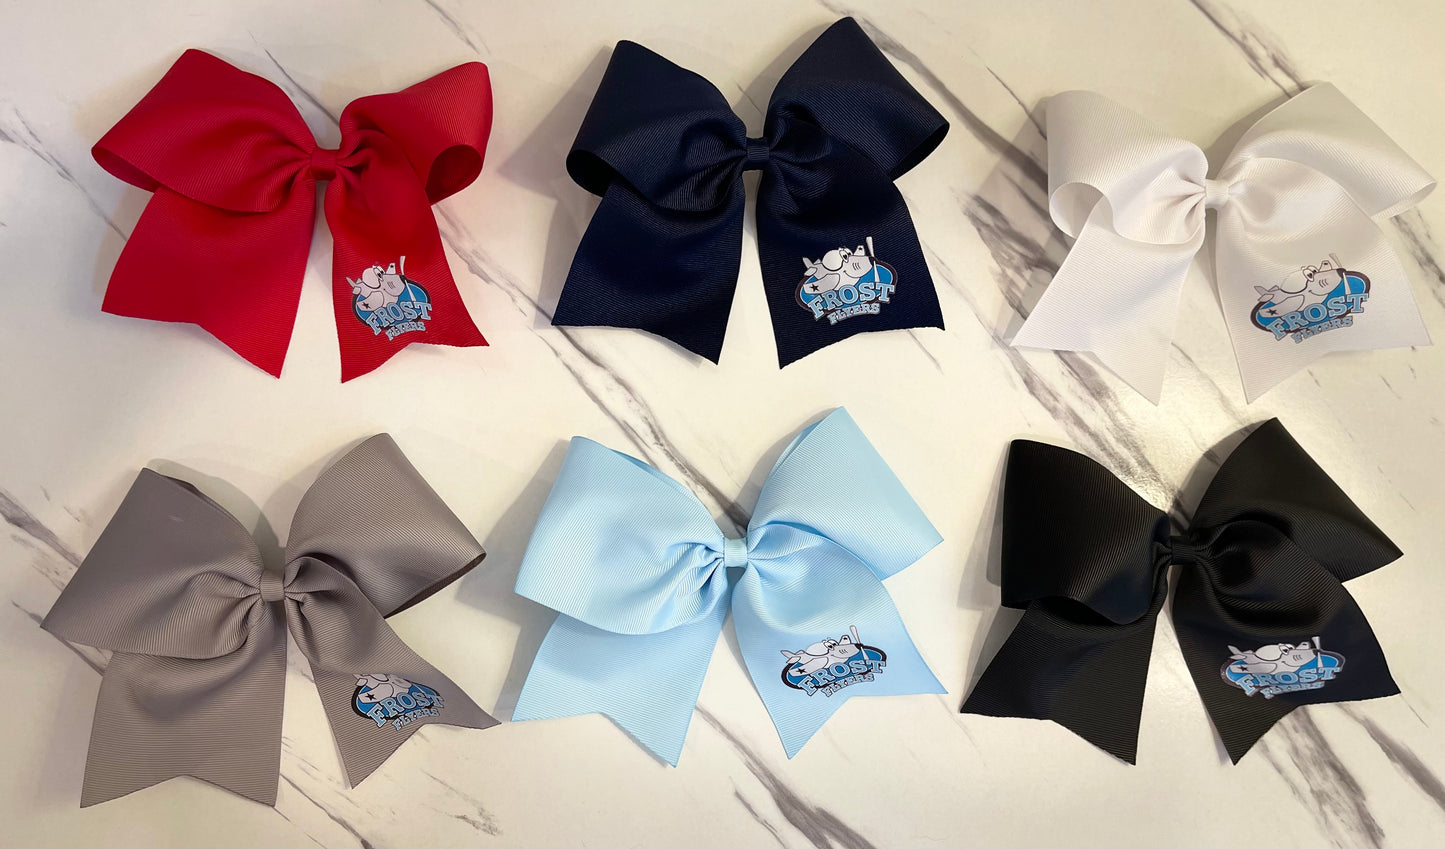 Frost Elementary Customized Cheer Bows